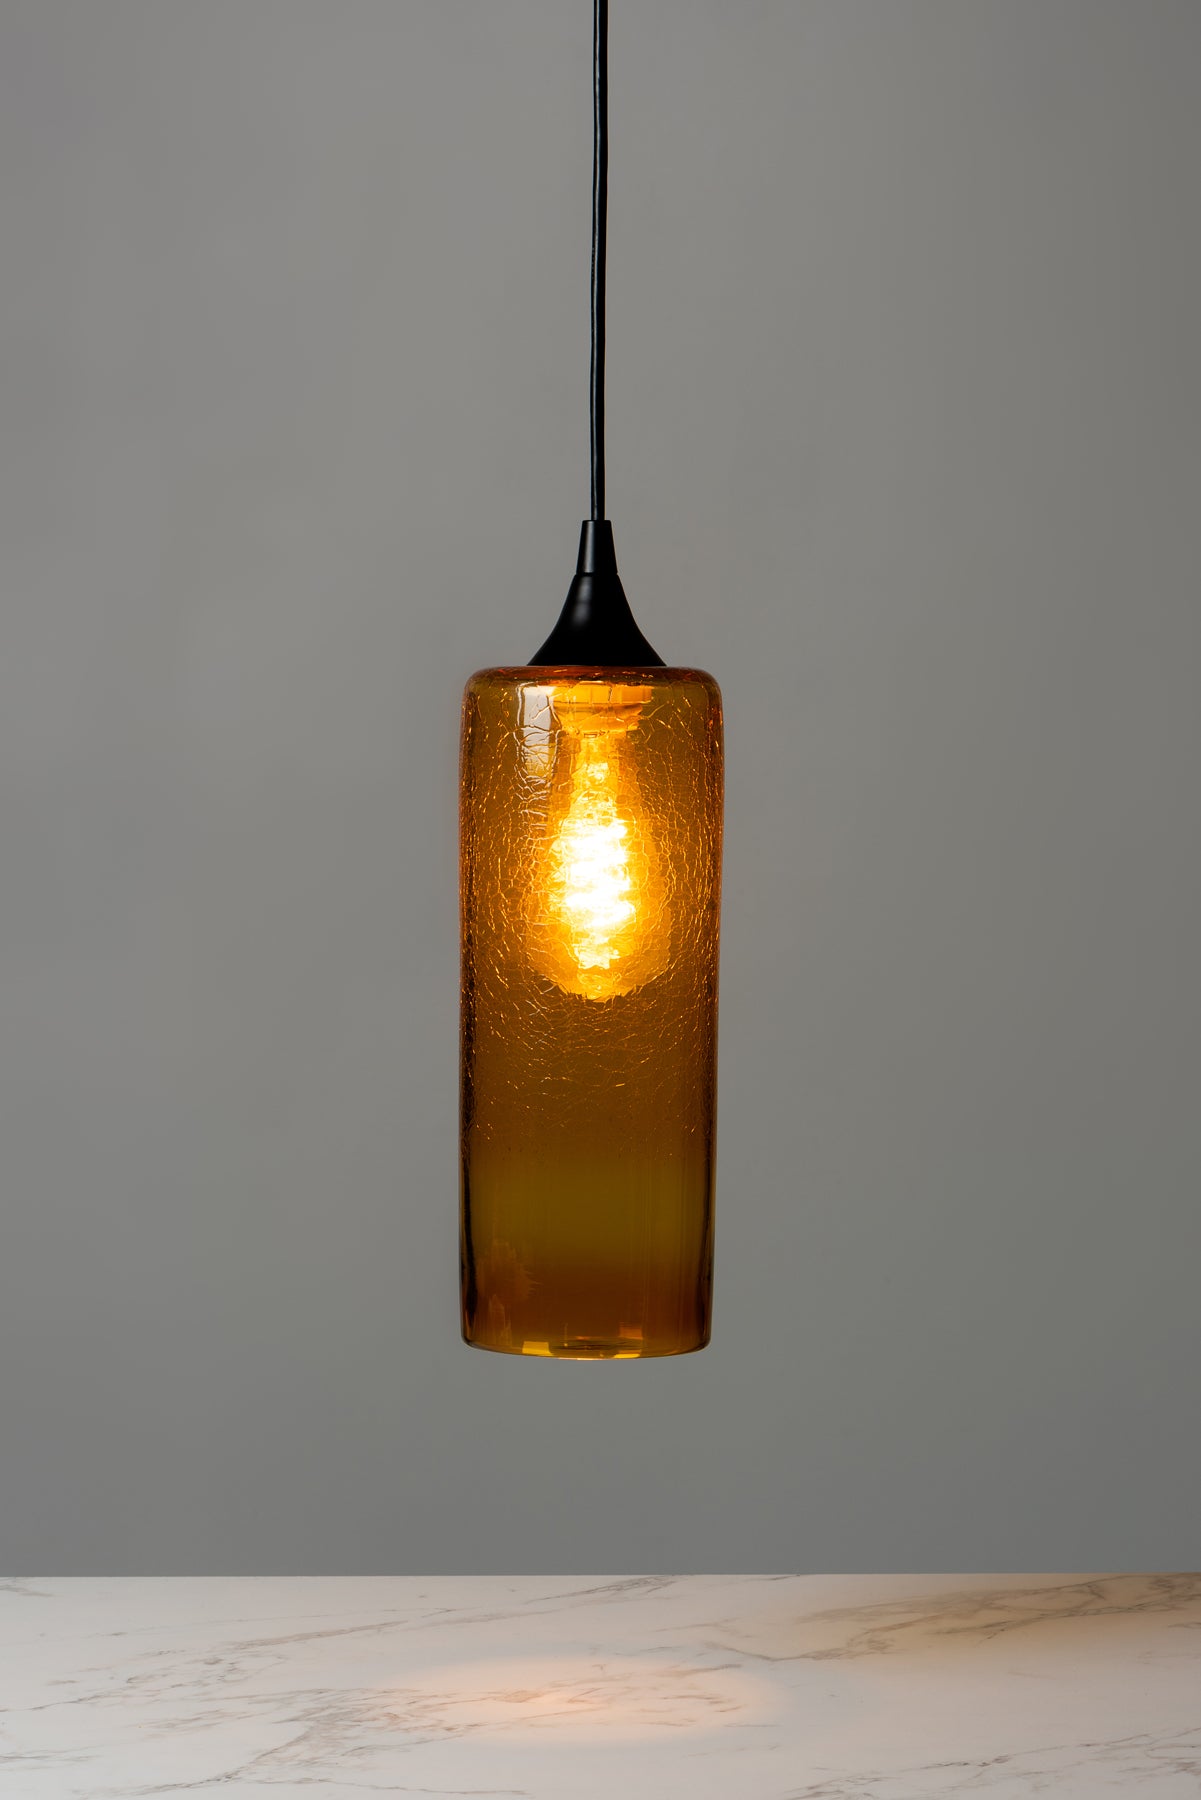 An orange cylindrical pendant light in a deep rusty orange hands above a table top. Image by Loam